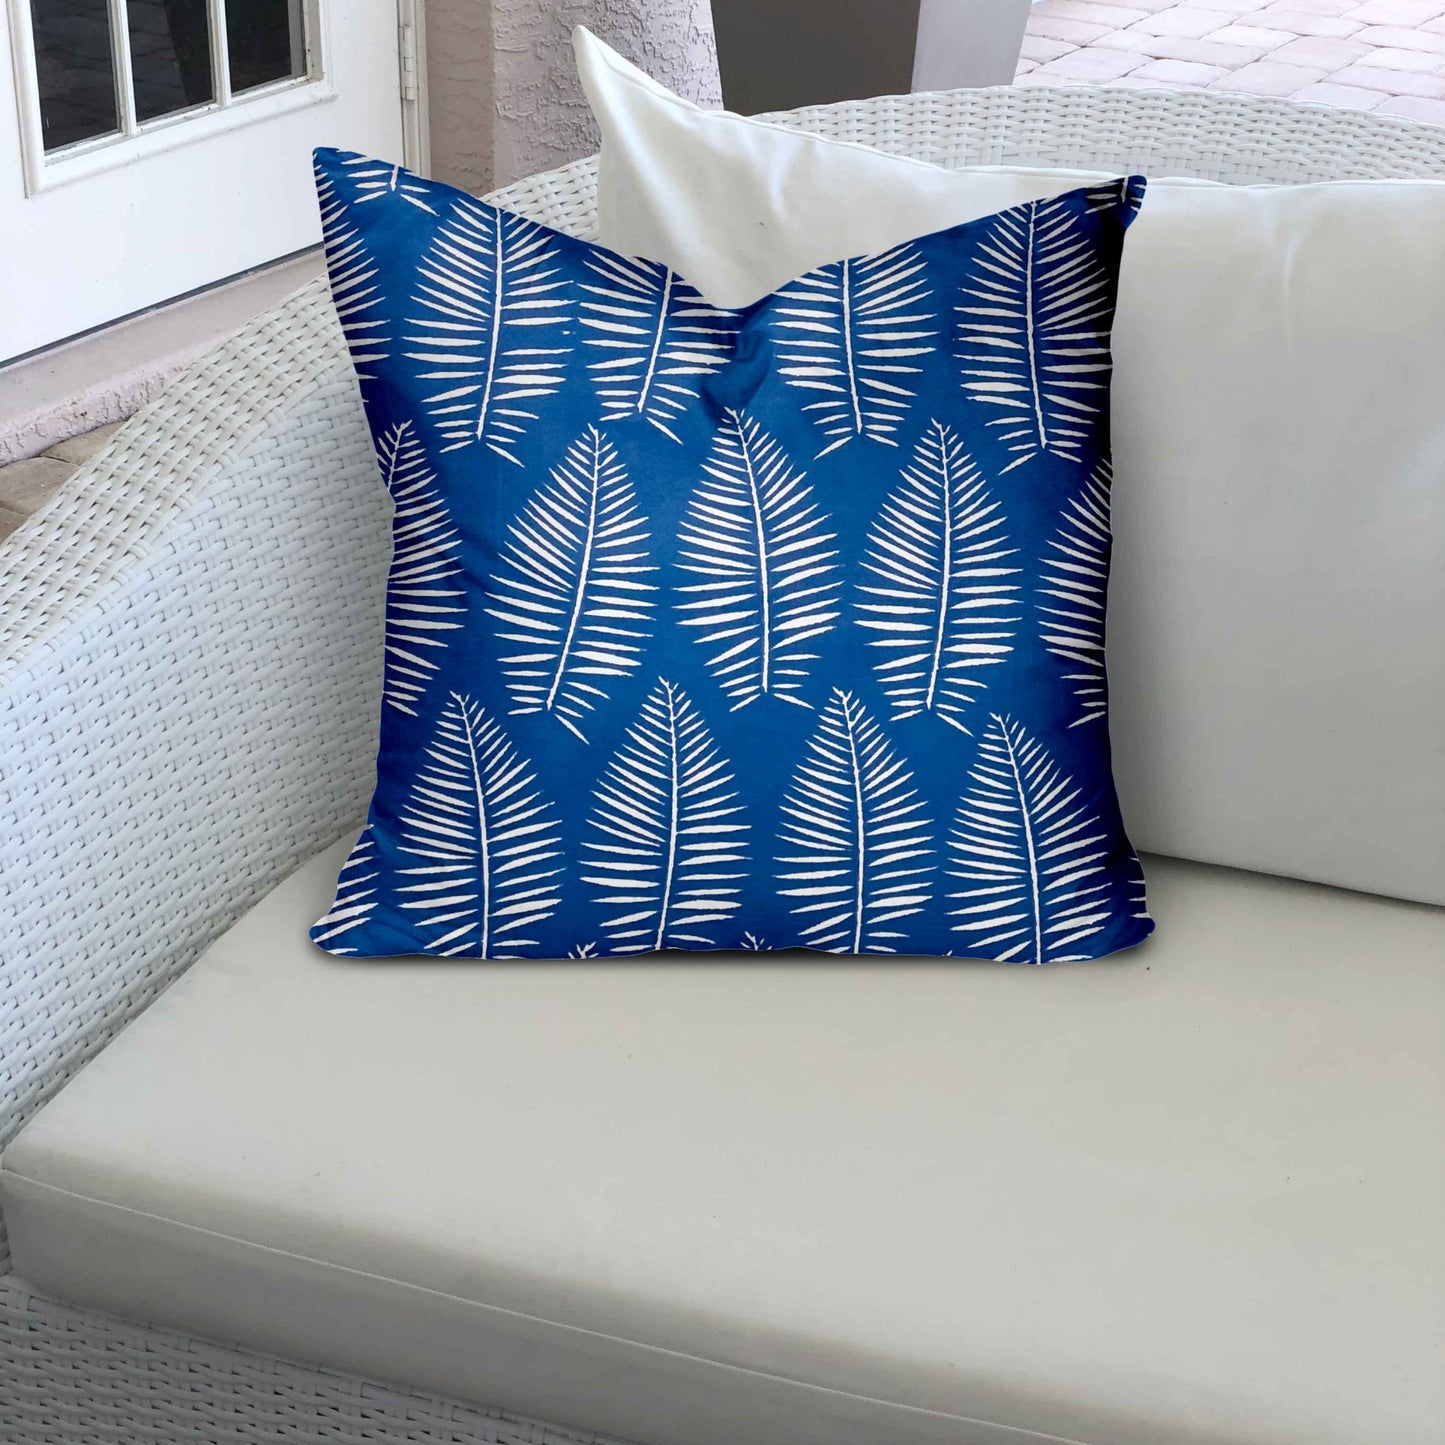 17" X 17" Blue And White Zippered Tropical Throw Indoor Outdoor Pillow